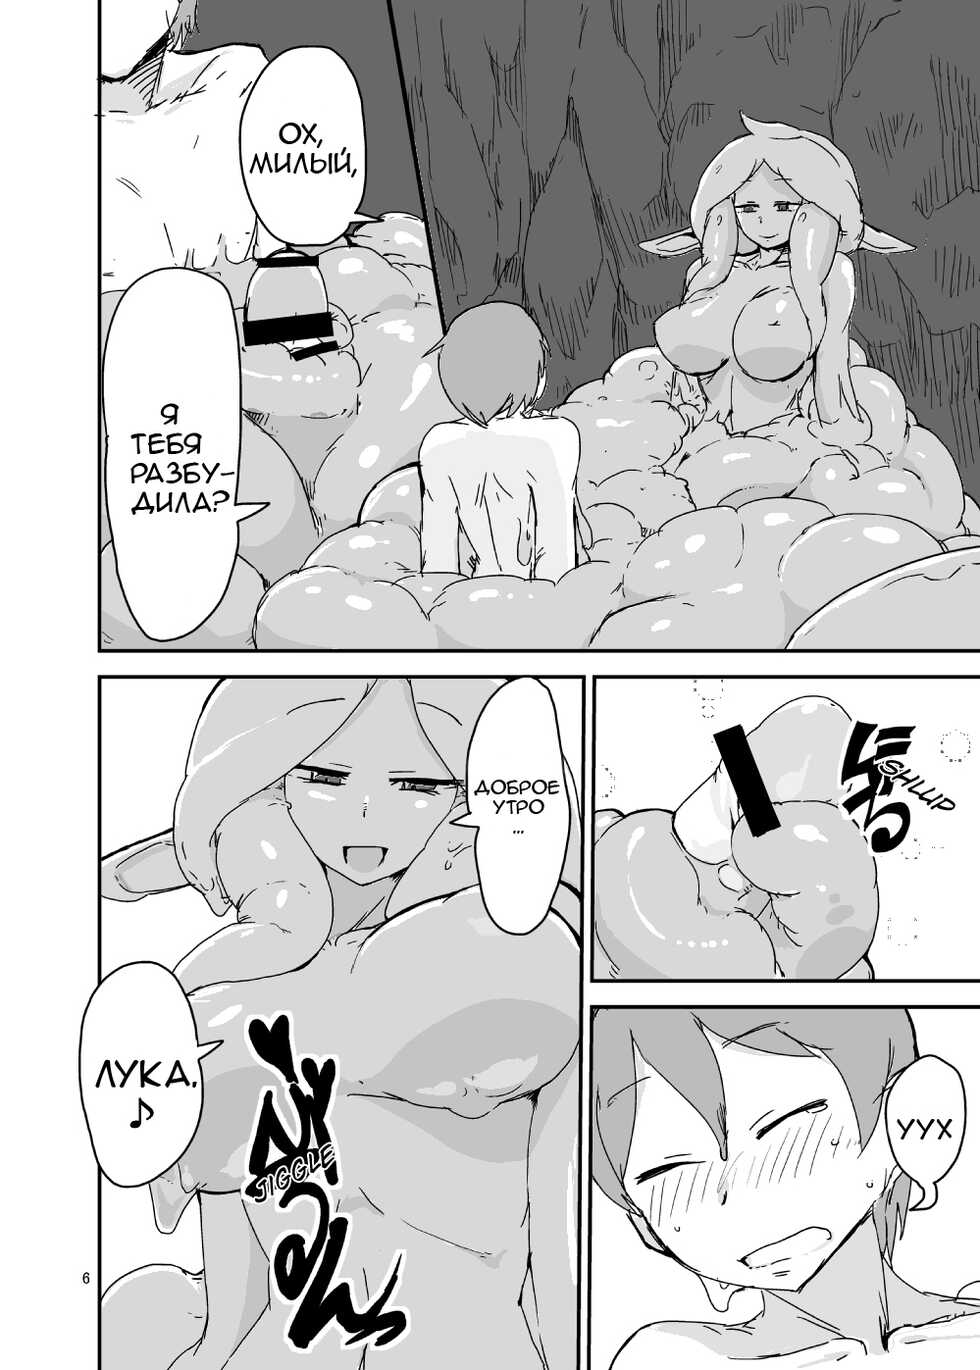 [Setouchi Pharm (Setouchi)] Mon Musu Quest! Beyond The End 2 (Monster Girl Quest!) [Russian] [﻿stycler94] [Digital] - Page 5